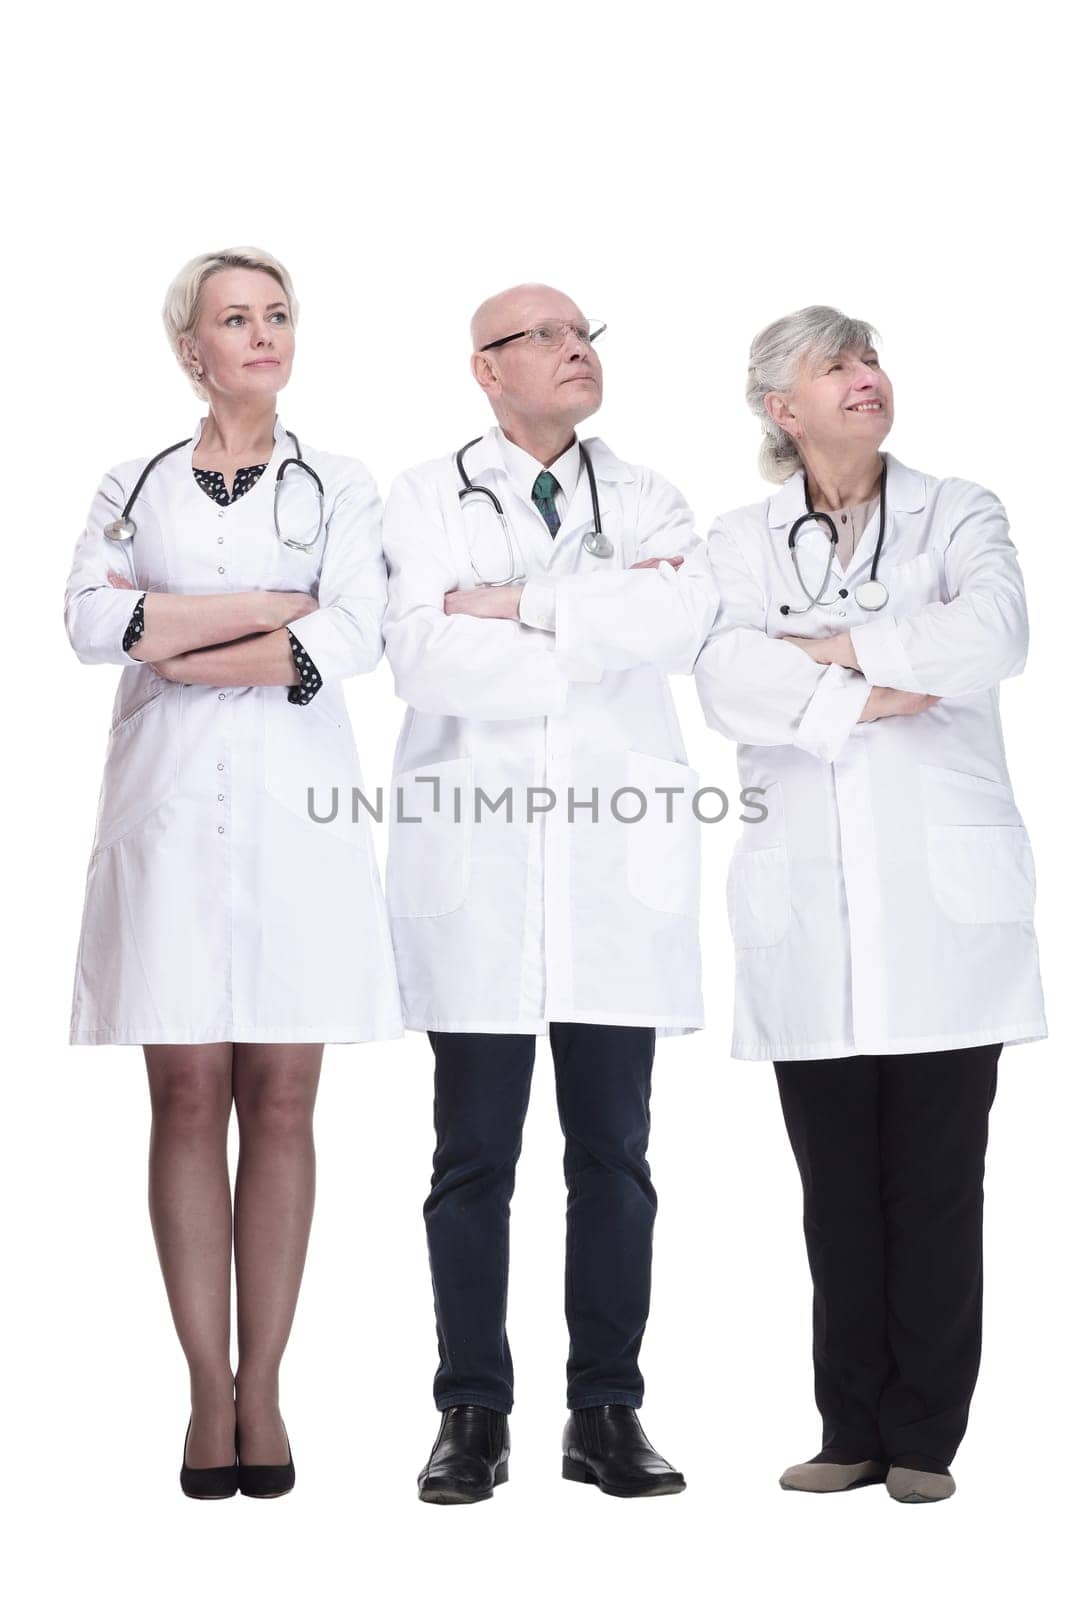 in full growth. experienced doctors colleagues standing together. isolated on a white background.